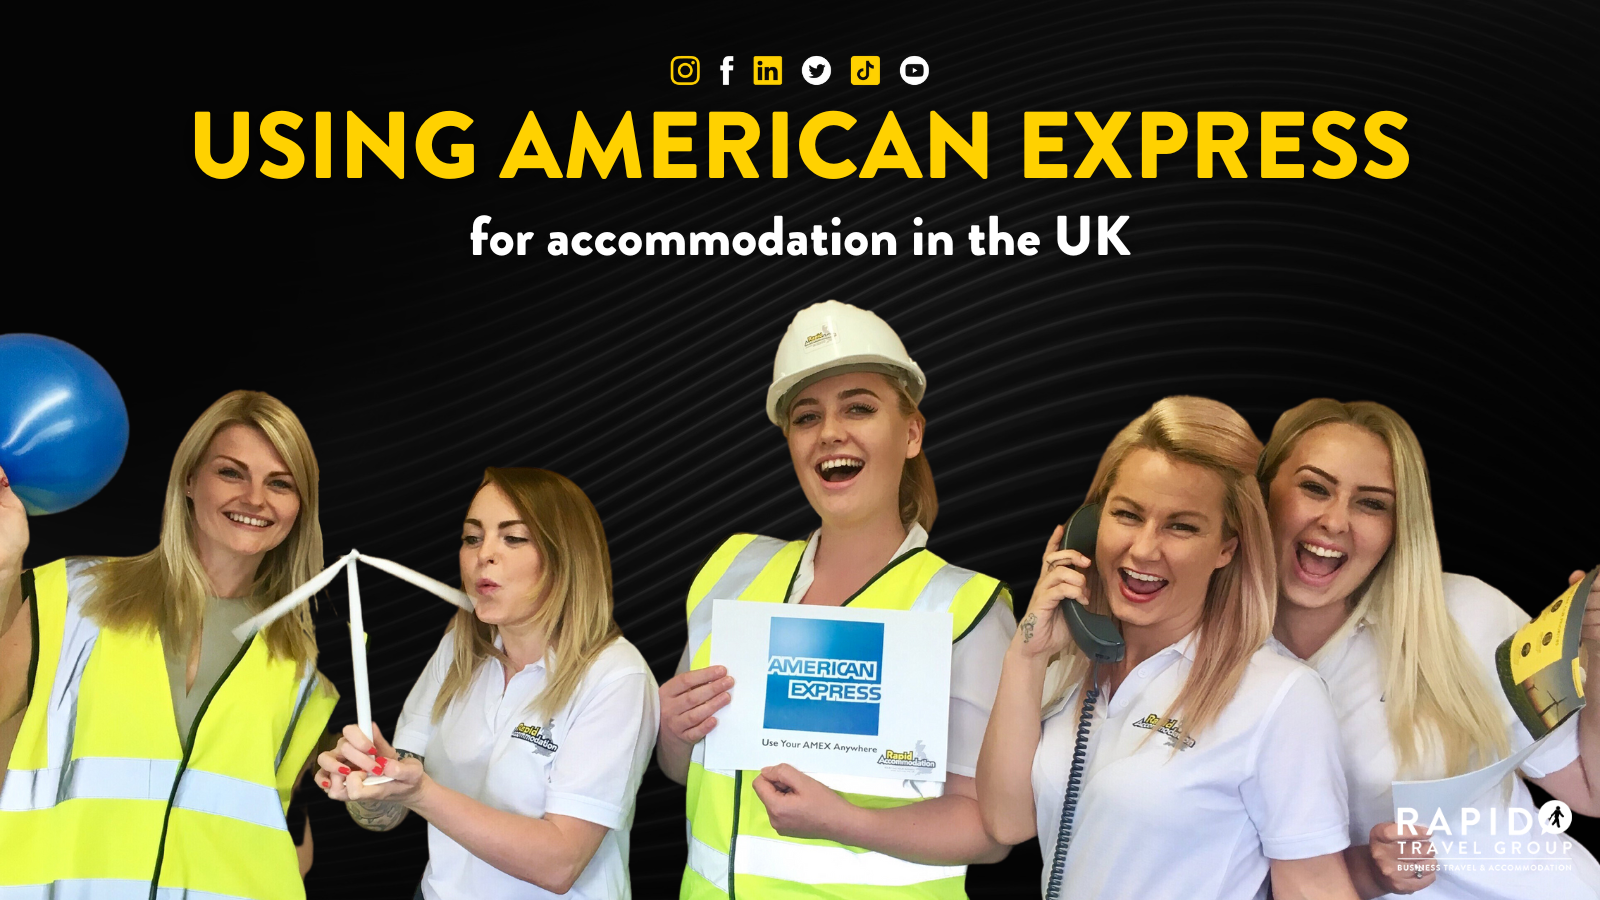 Using American Express for accommodation in the UK